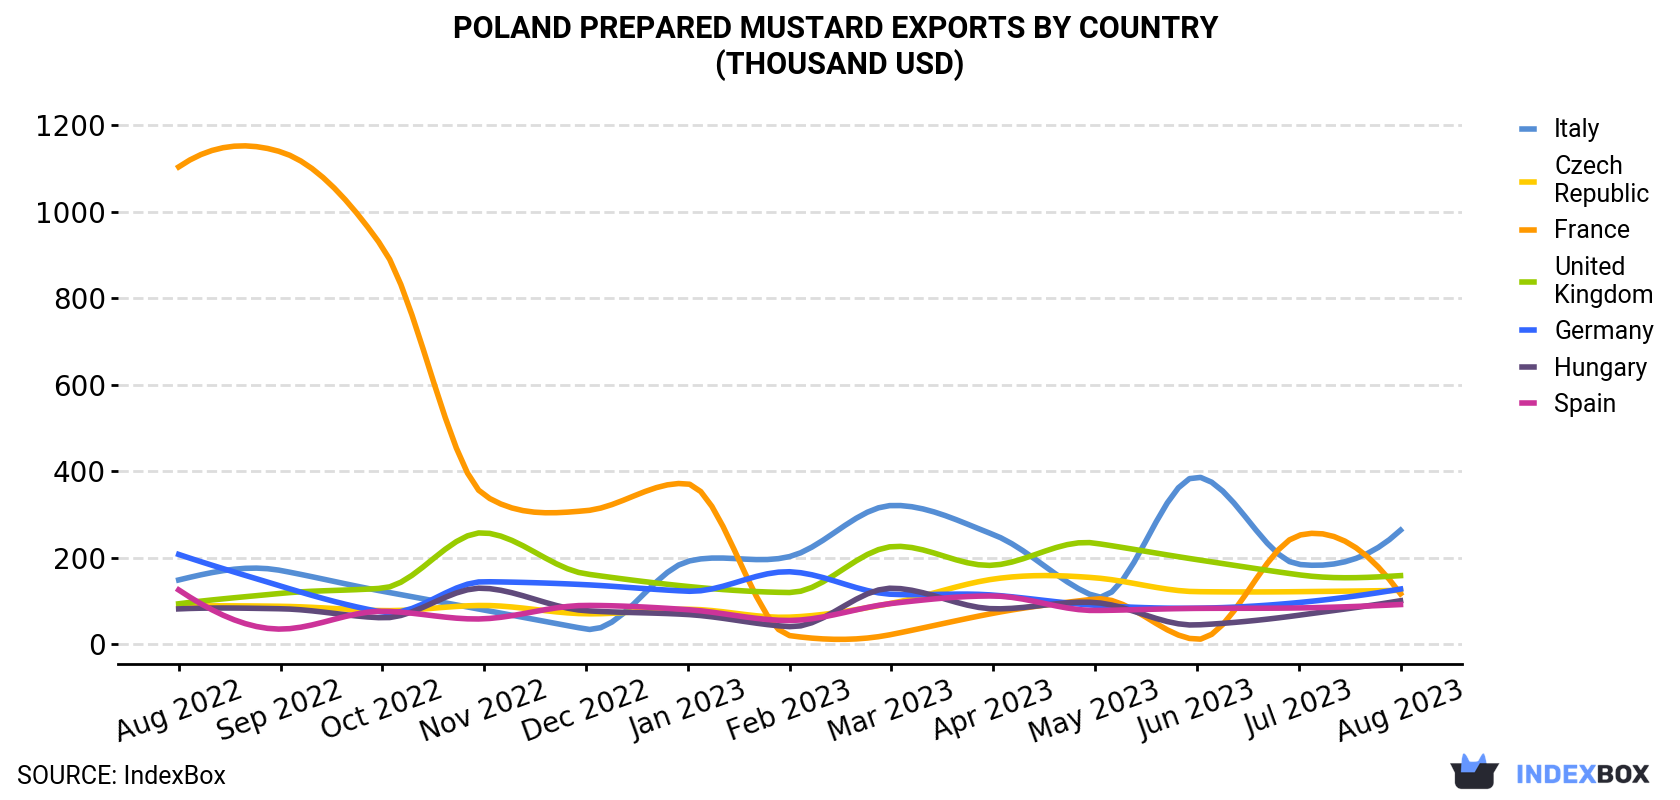 Poland Prepared Mustard Exports By Country (Thousand USD)